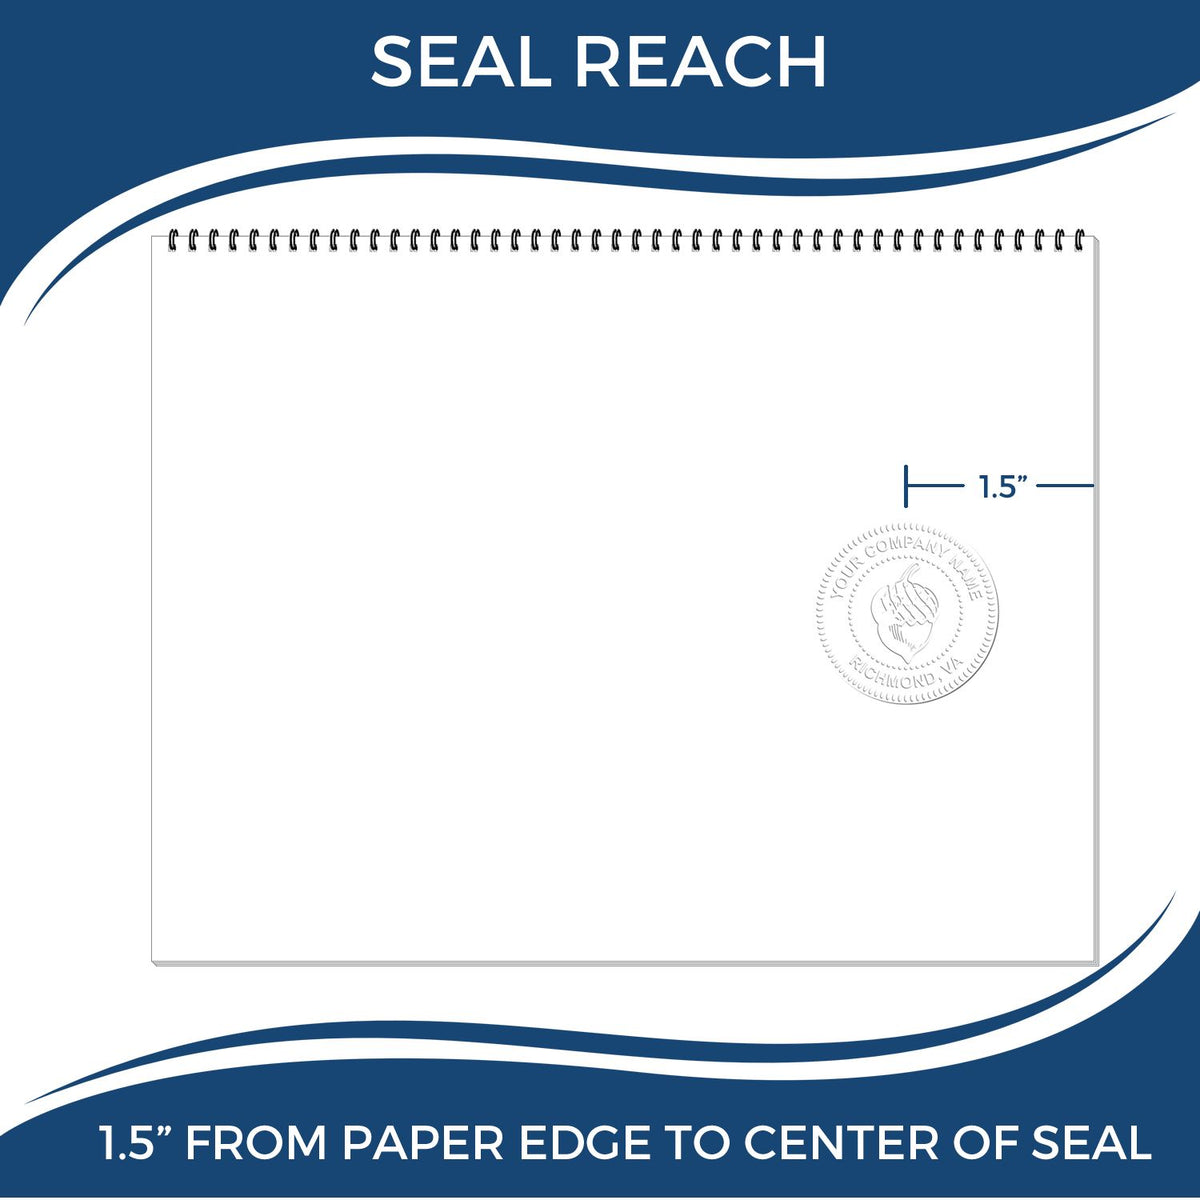 An infographic showing the seal reach which is represented by a ruler and a miniature seal image of the Handheld Texas Professional Geologist Embosser